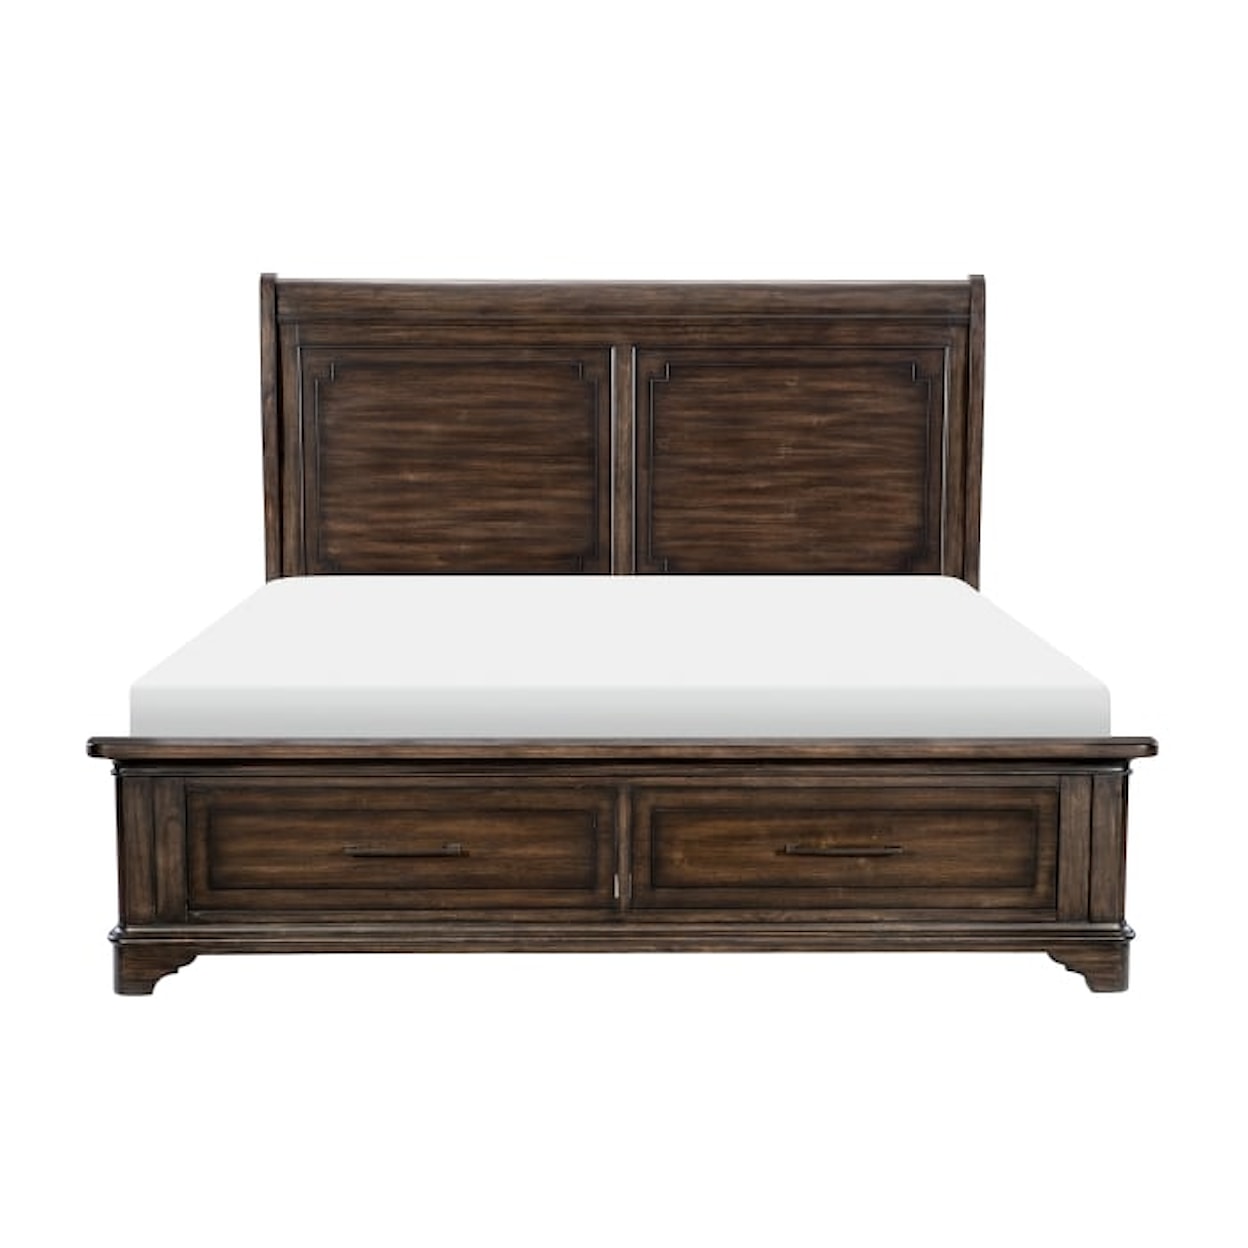 Homelegance Boone King  Bed with FB Storage